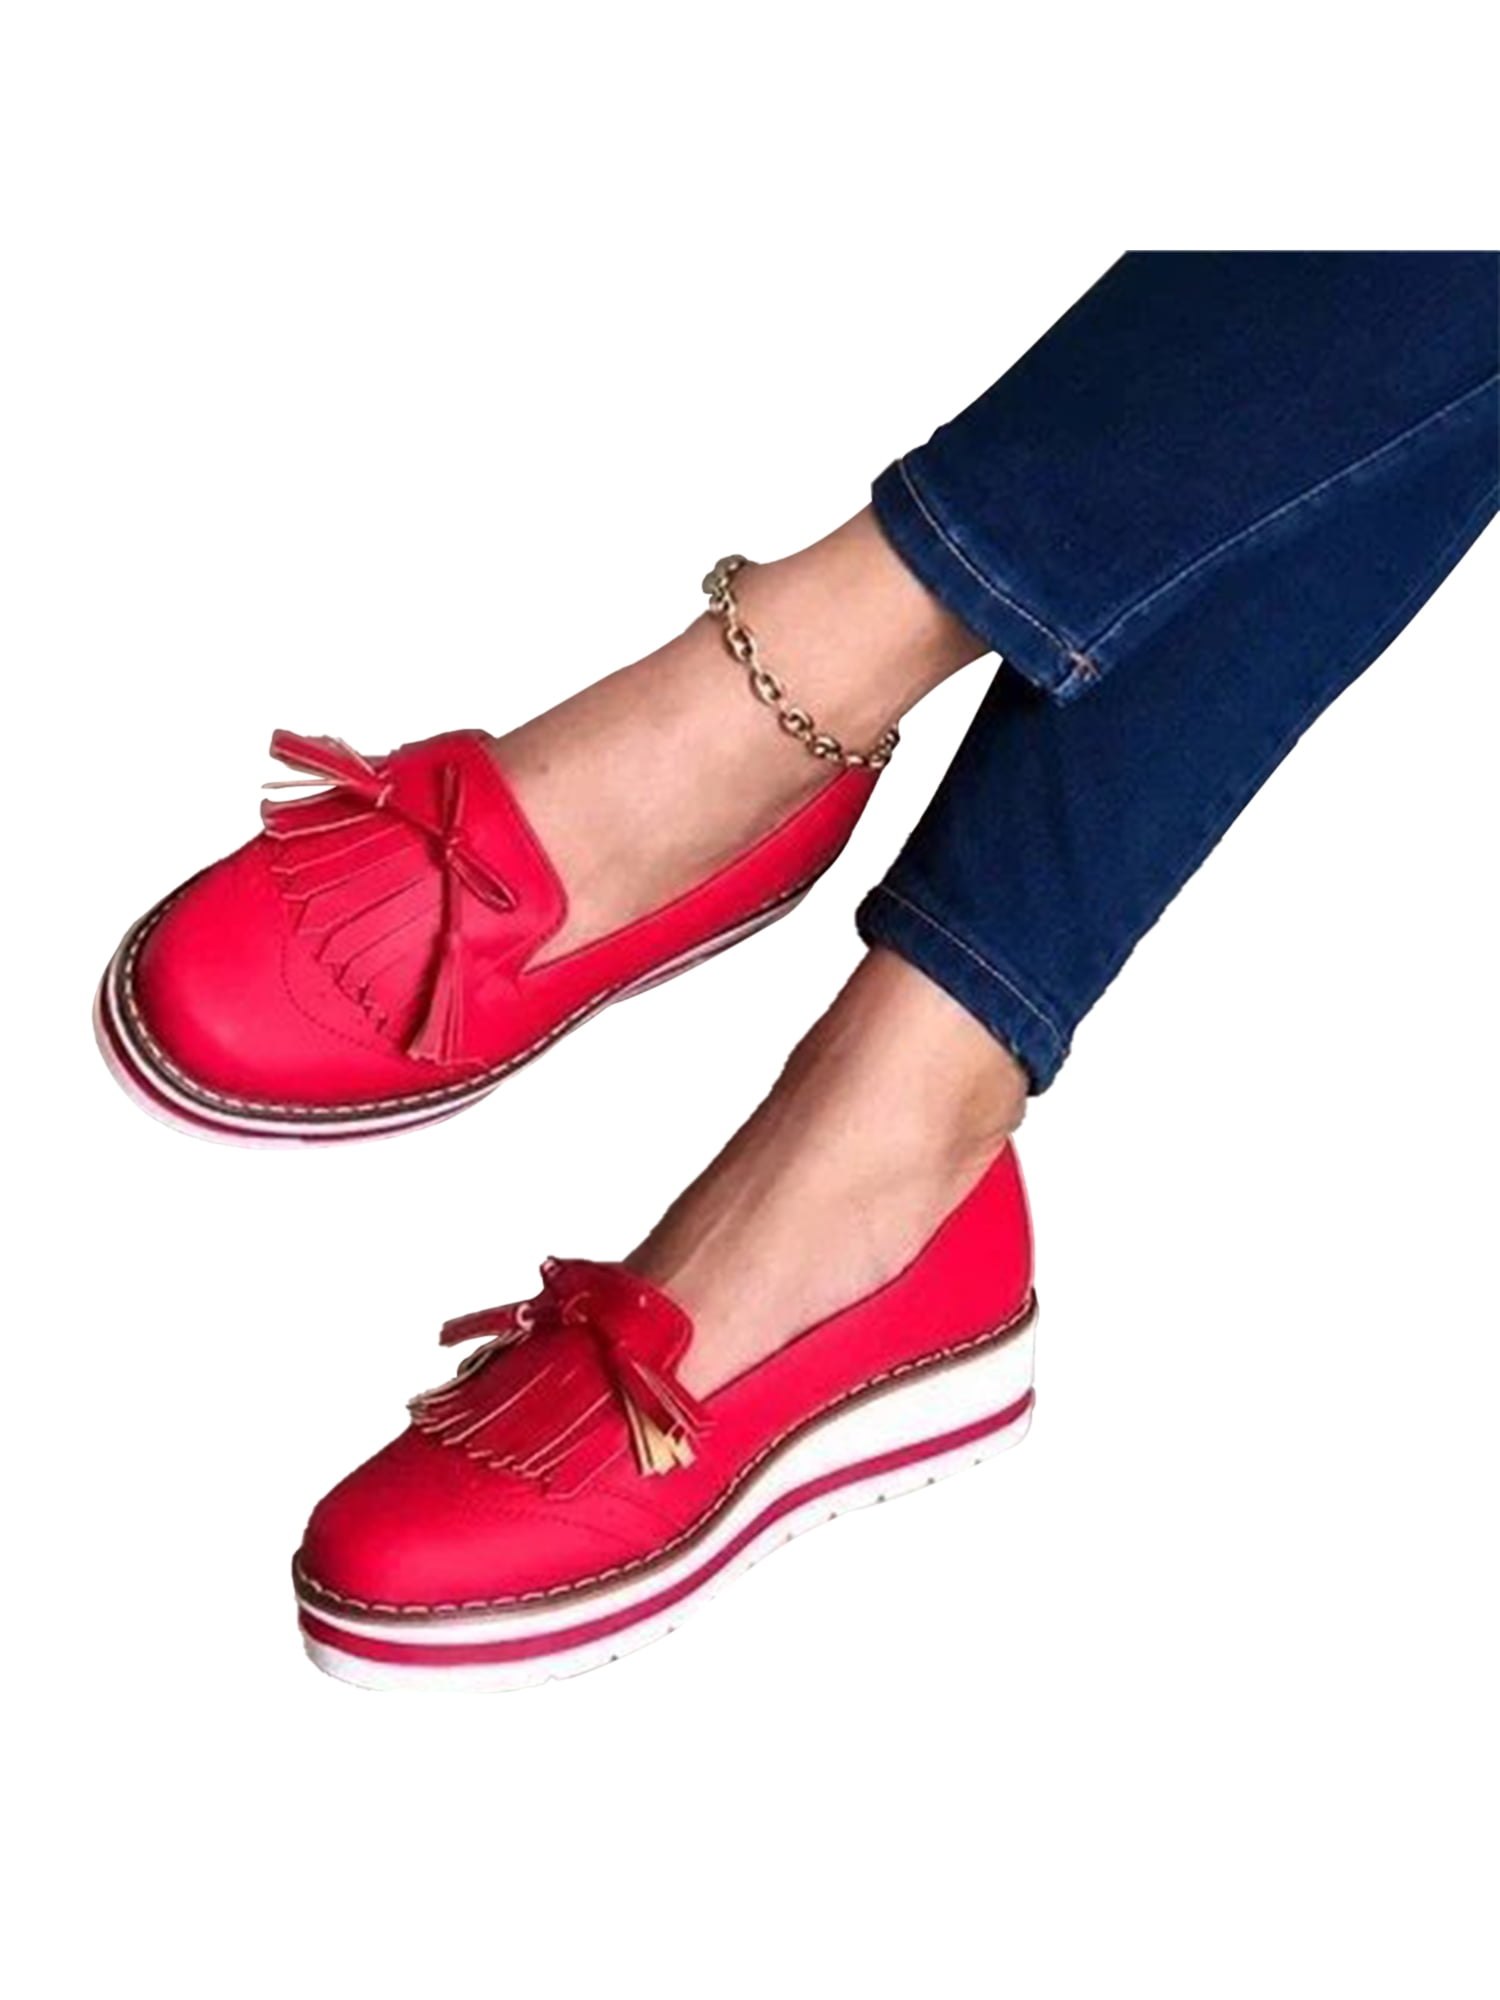 Tods Heaven Logo Leather Driving Shoes in Red Womens Shoes Flats and flat shoes Loafers and moccasins 